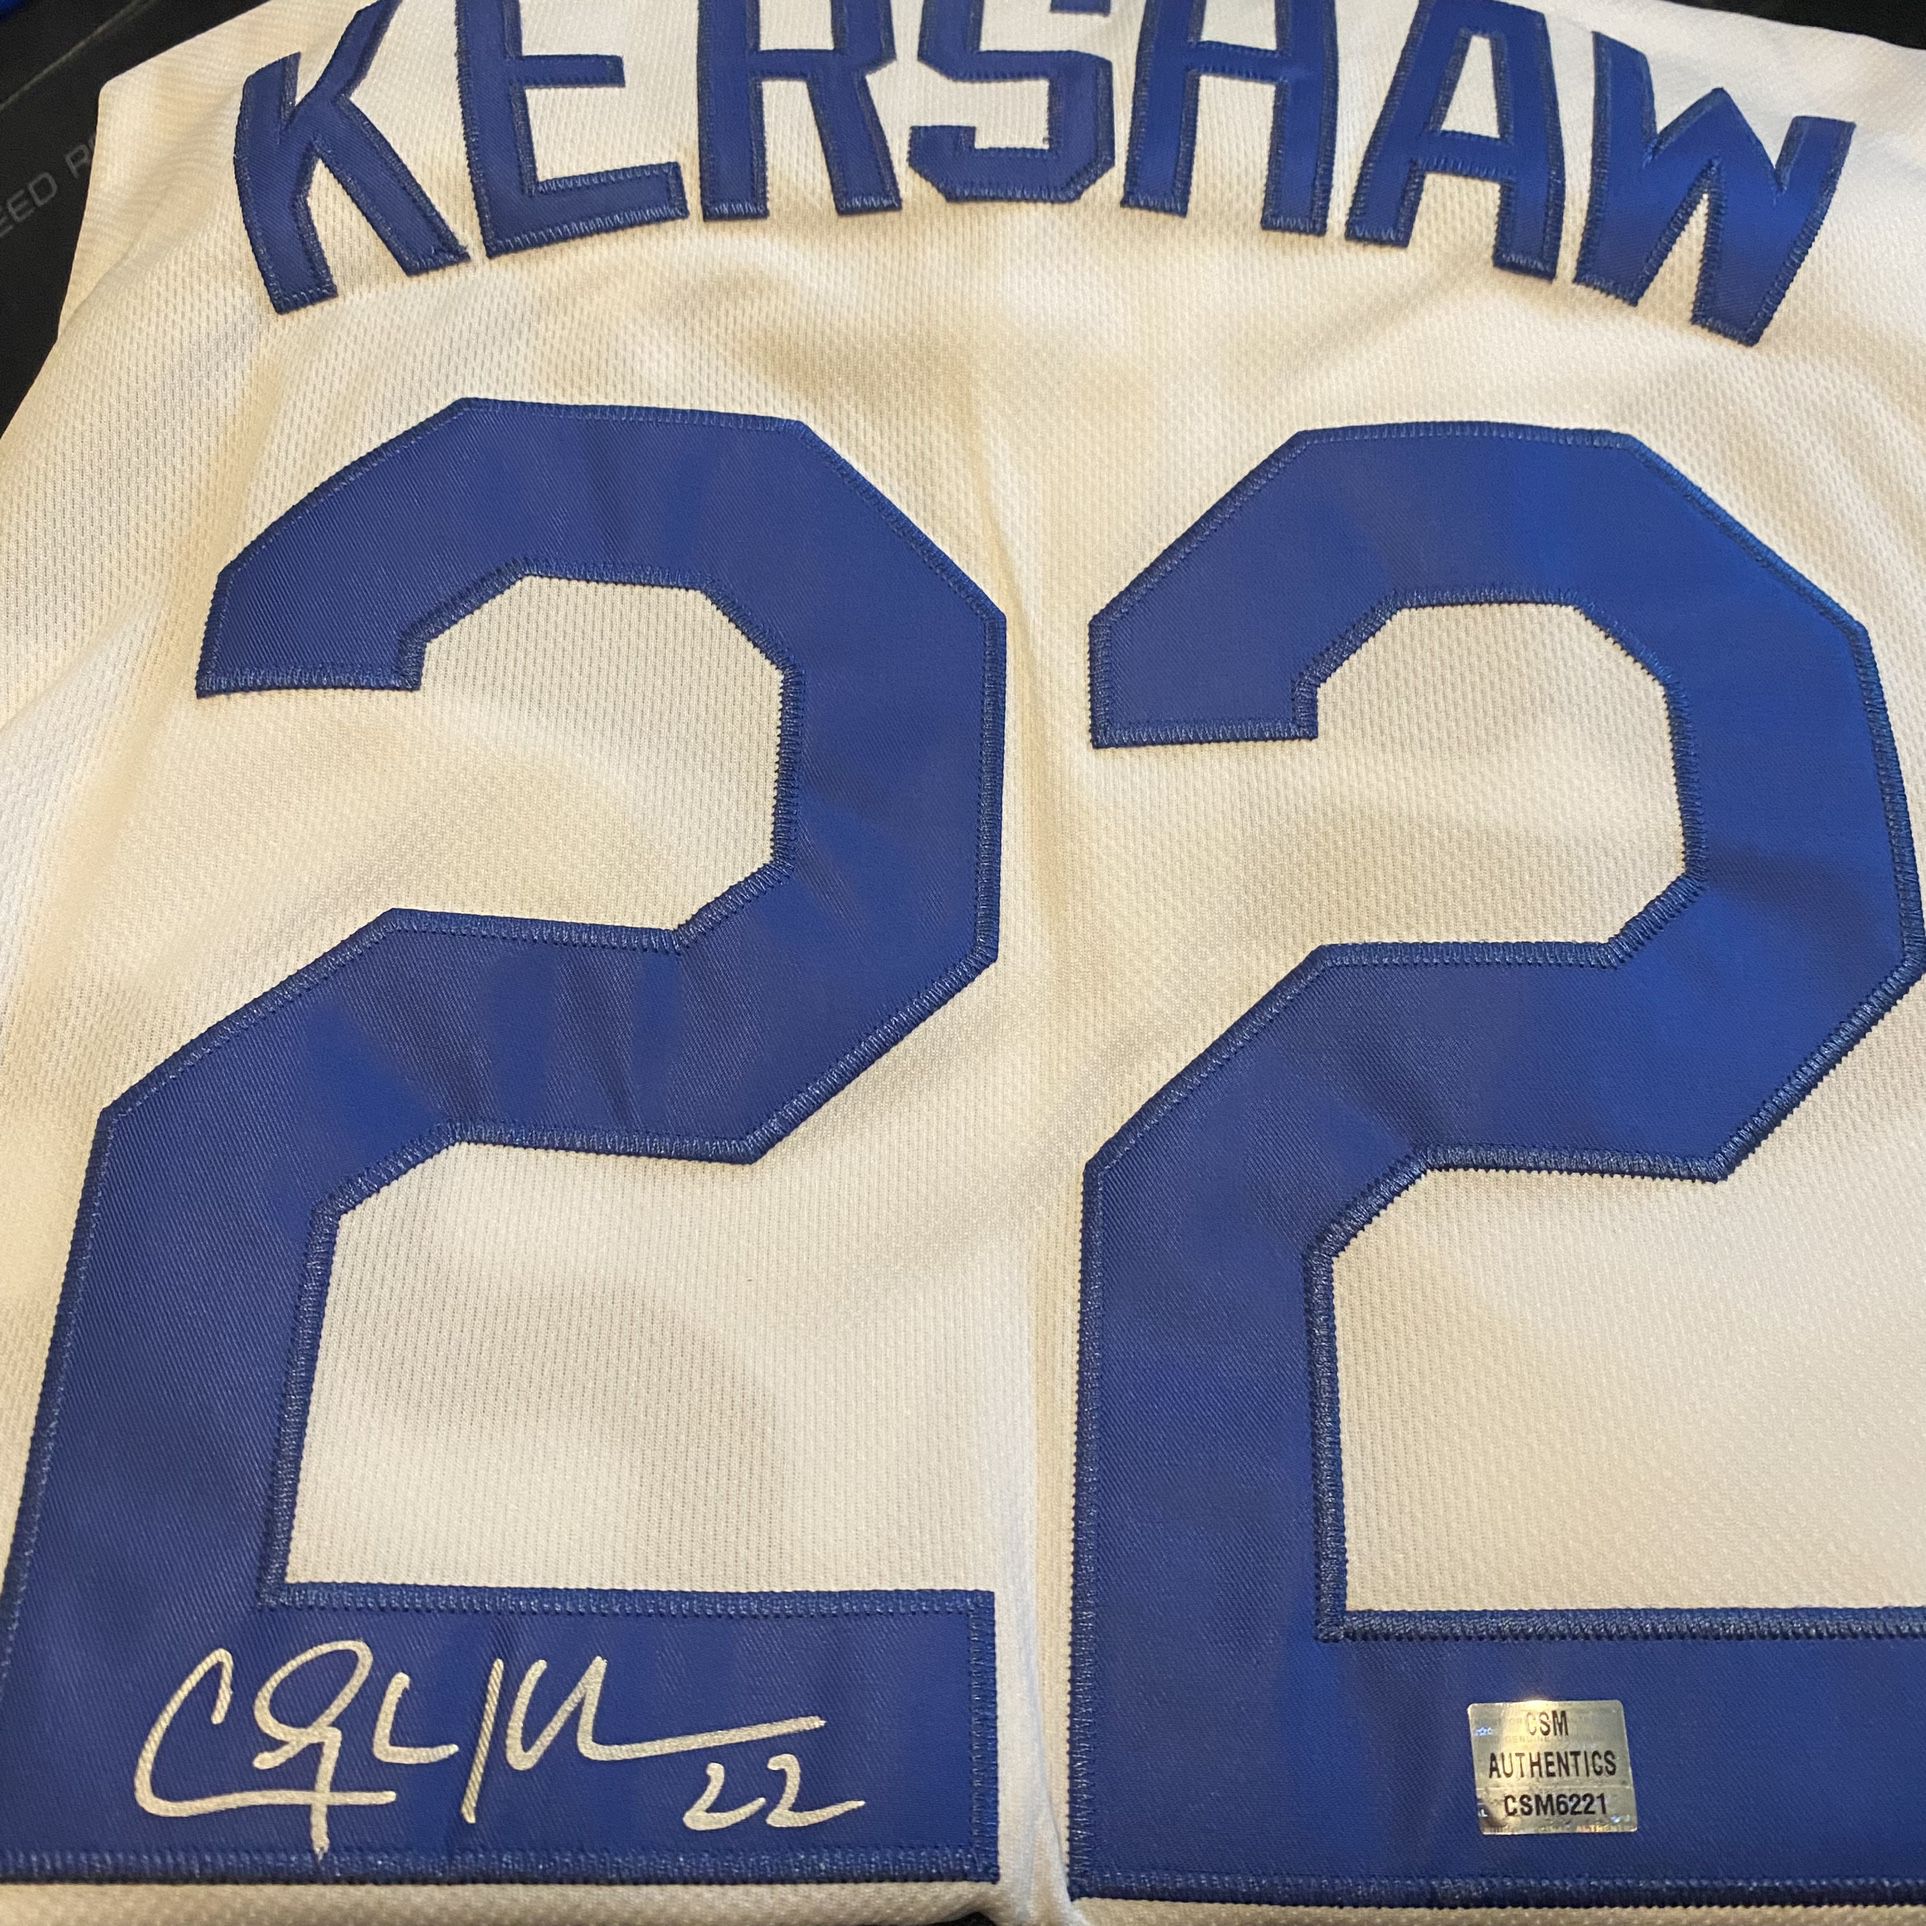 Clayton Kershaw Autograph Jersey Los Angeles Dodgers for Sale in